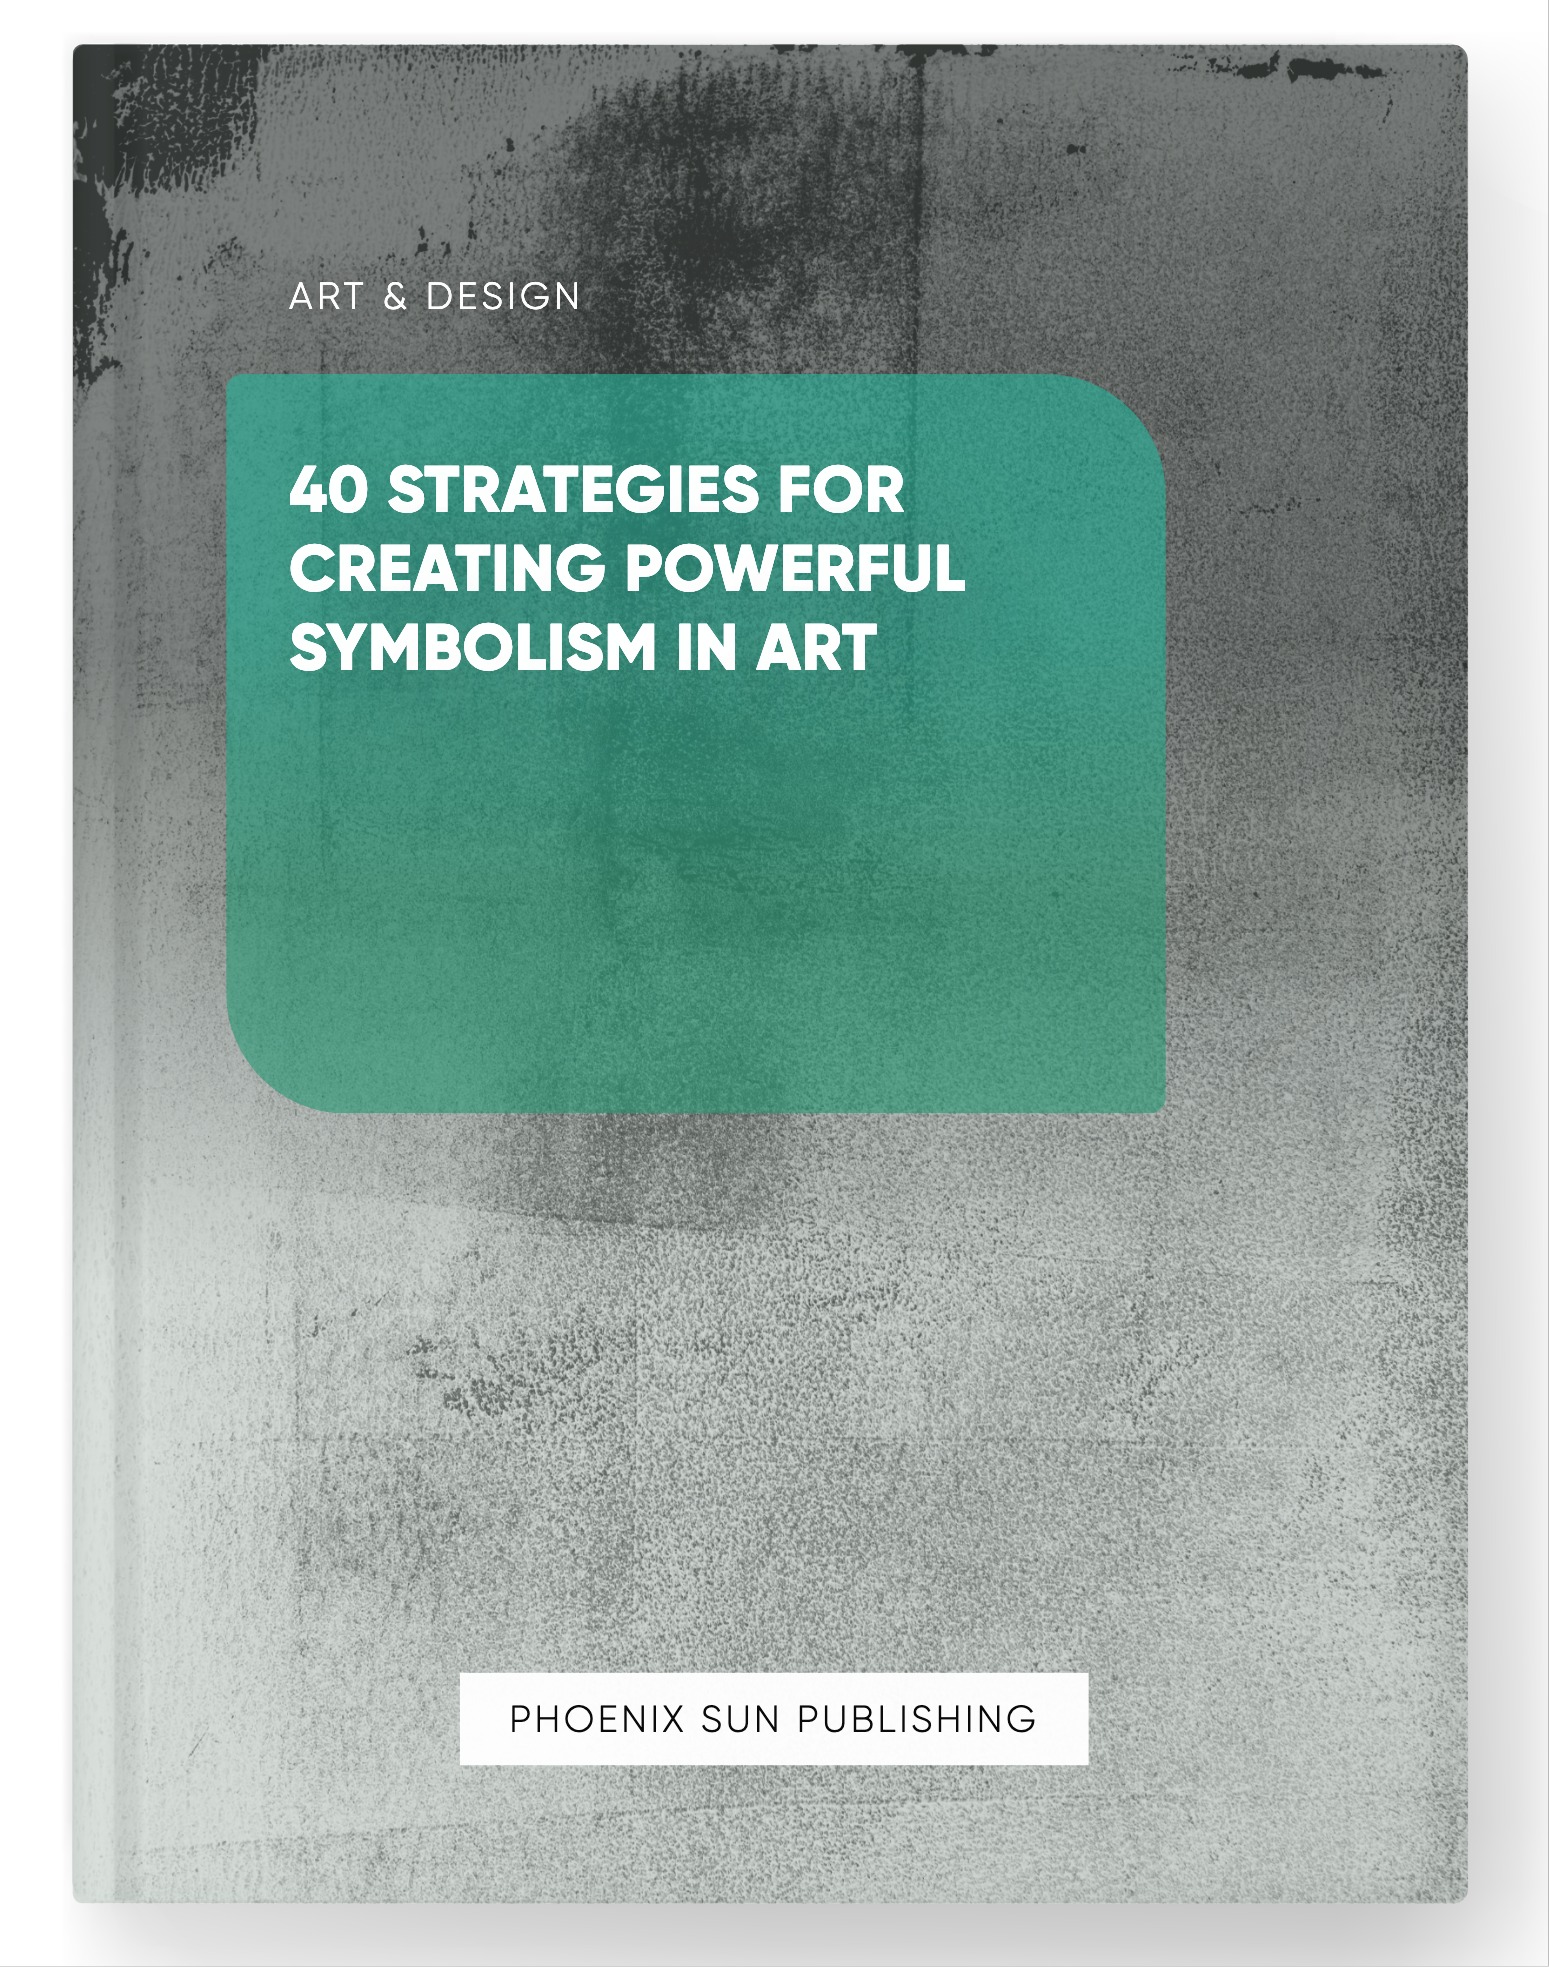 40 Strategies for Creating Powerful Symbolism in Art